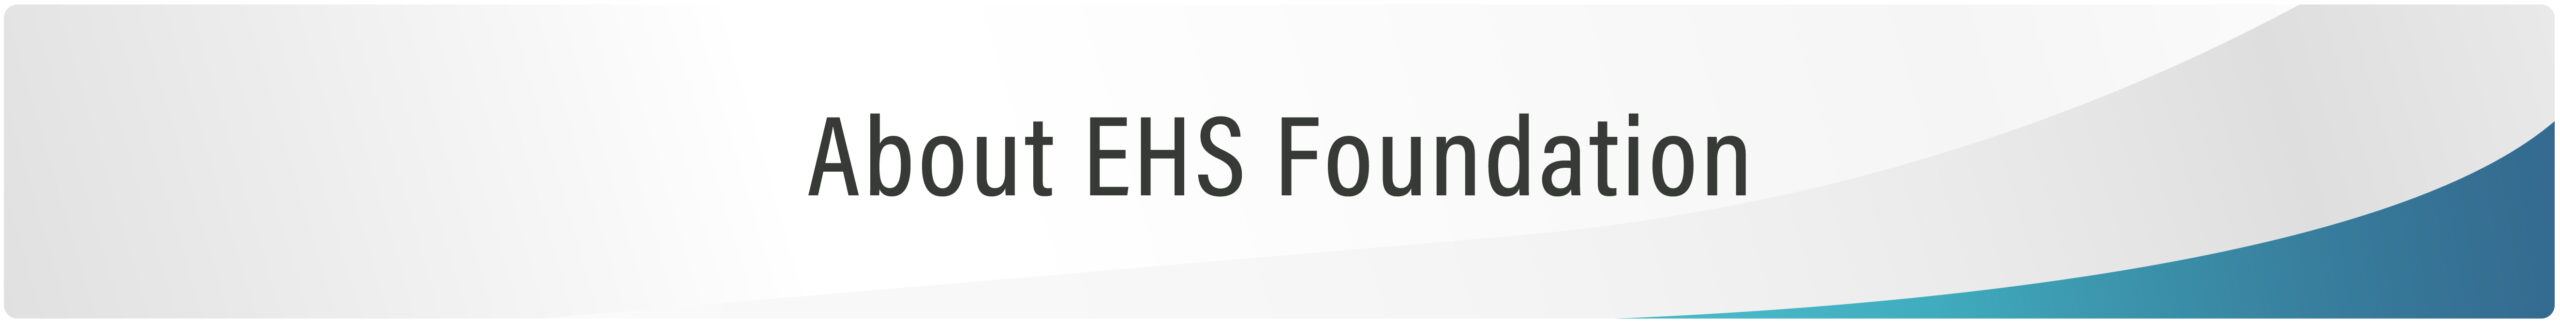 about ehs foundation 